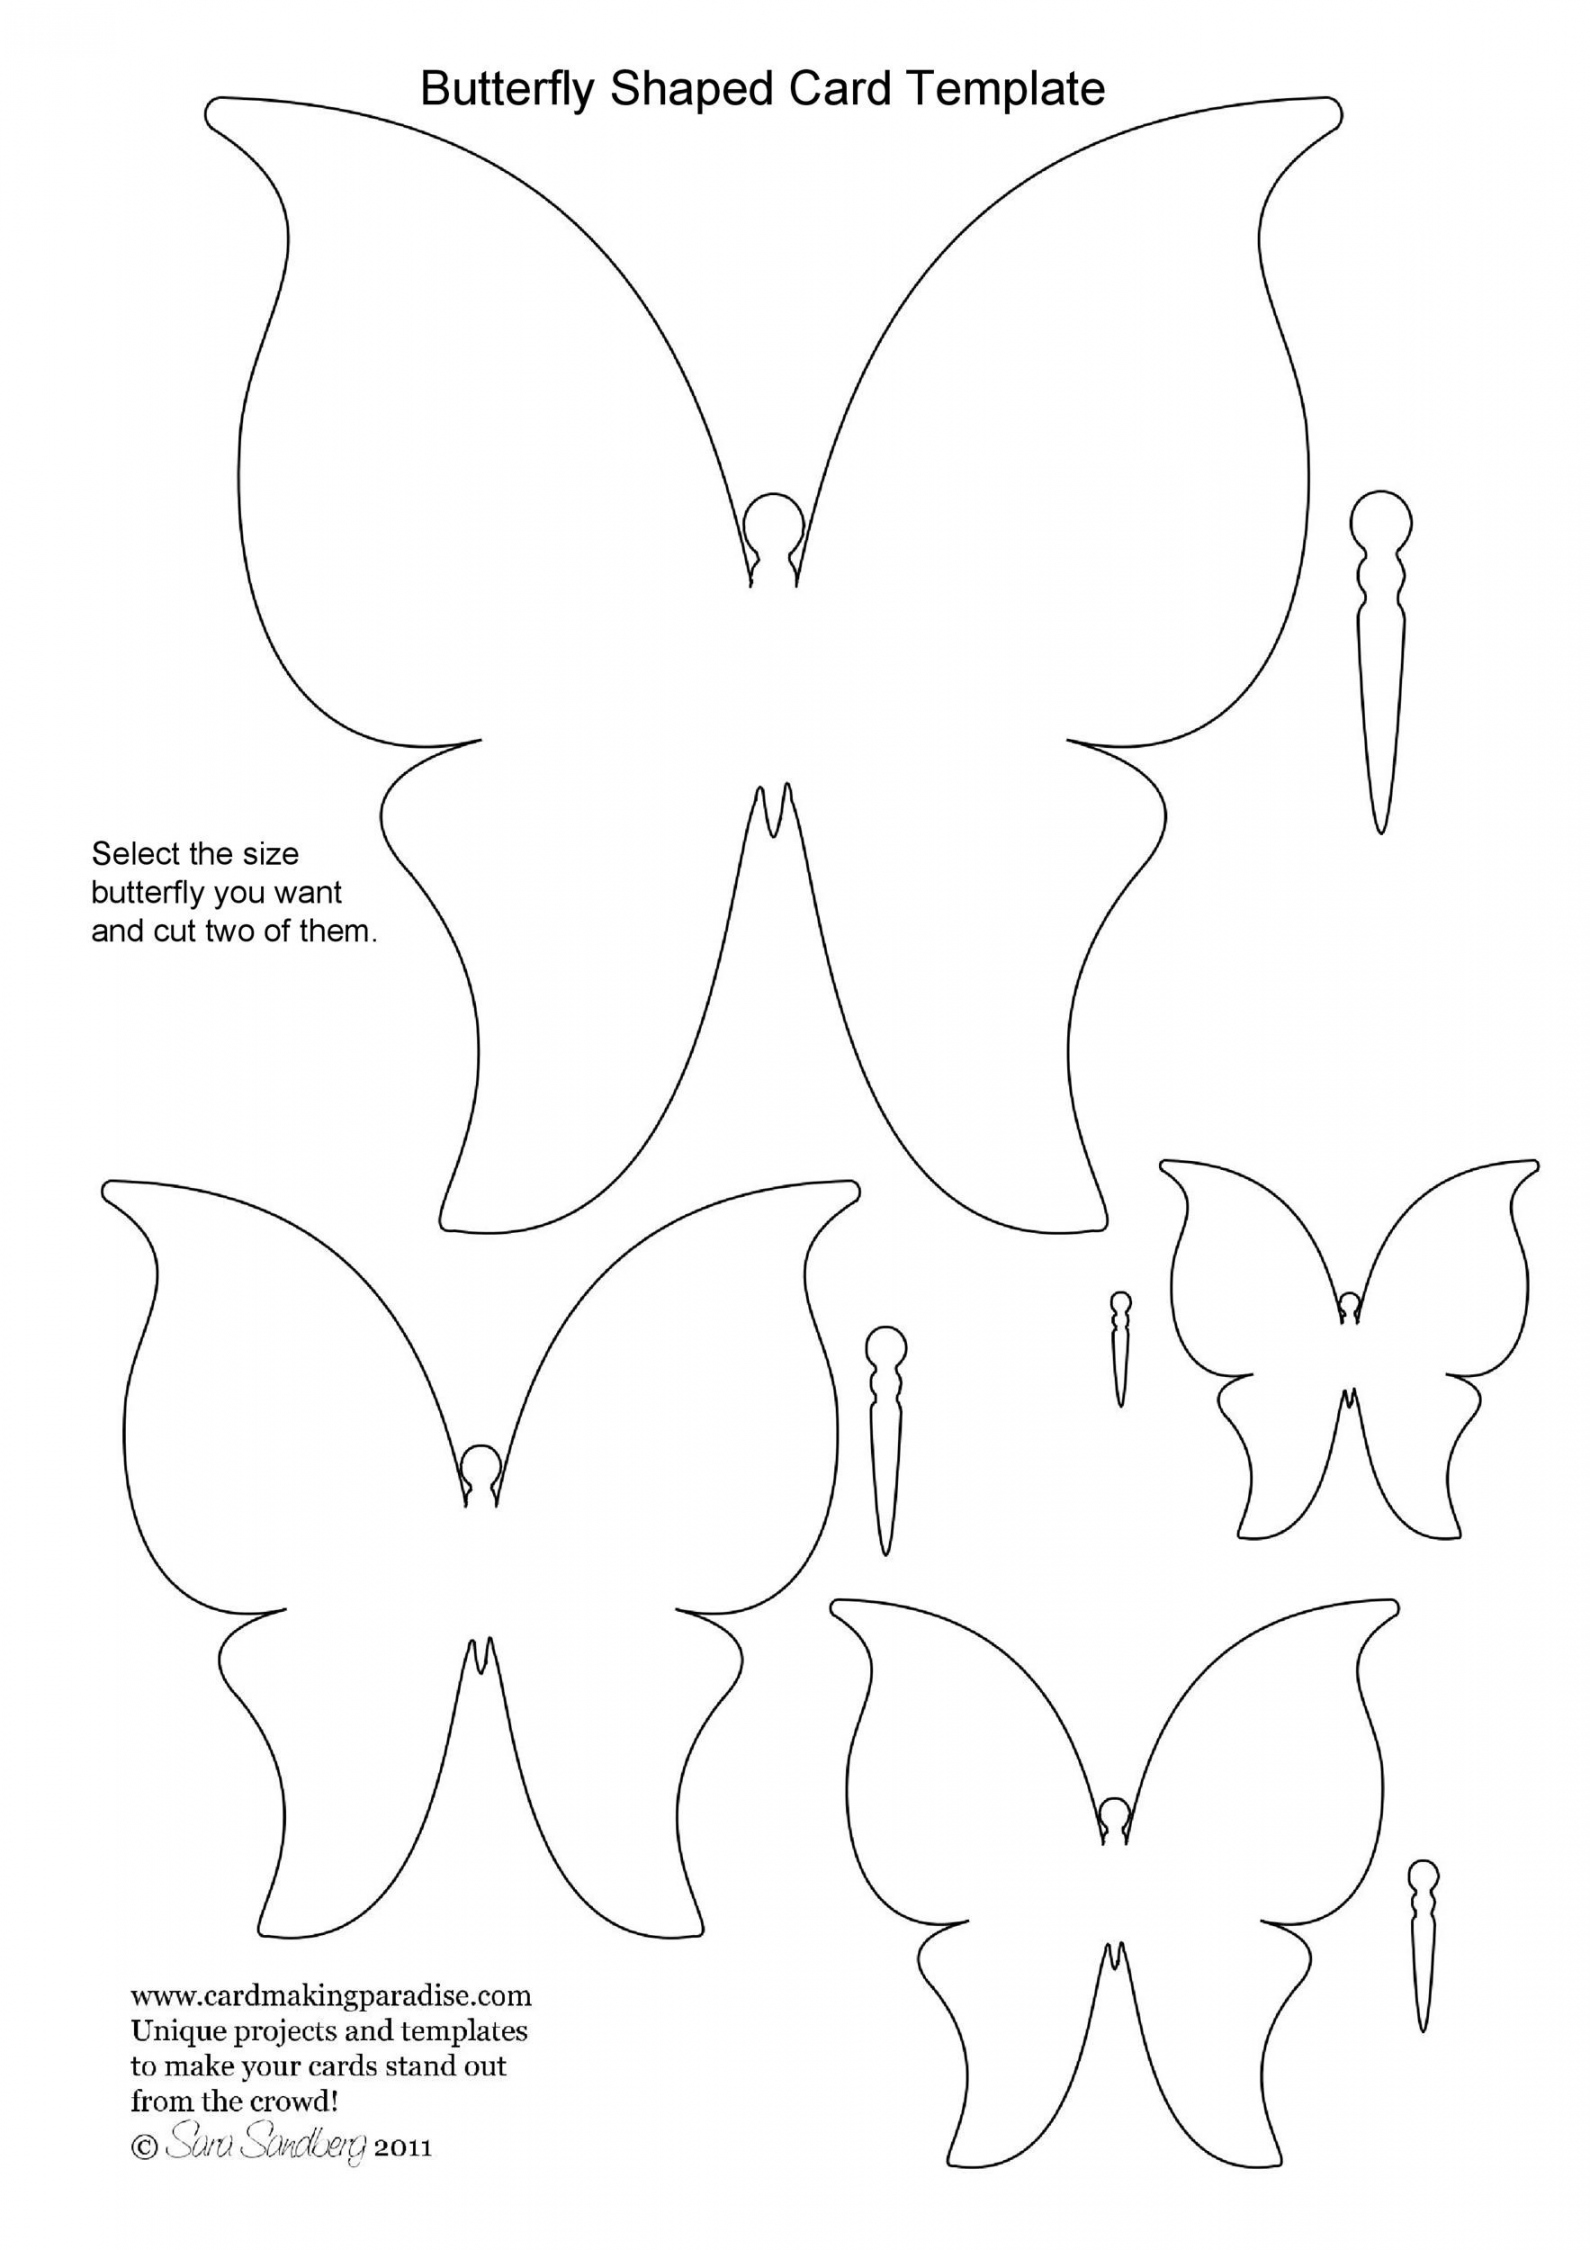 Printable & Cut Out Butterfly Templates 🦋 ᐅ TemplateLab - FREE Printables - Free Printable 3d Butterfly Template